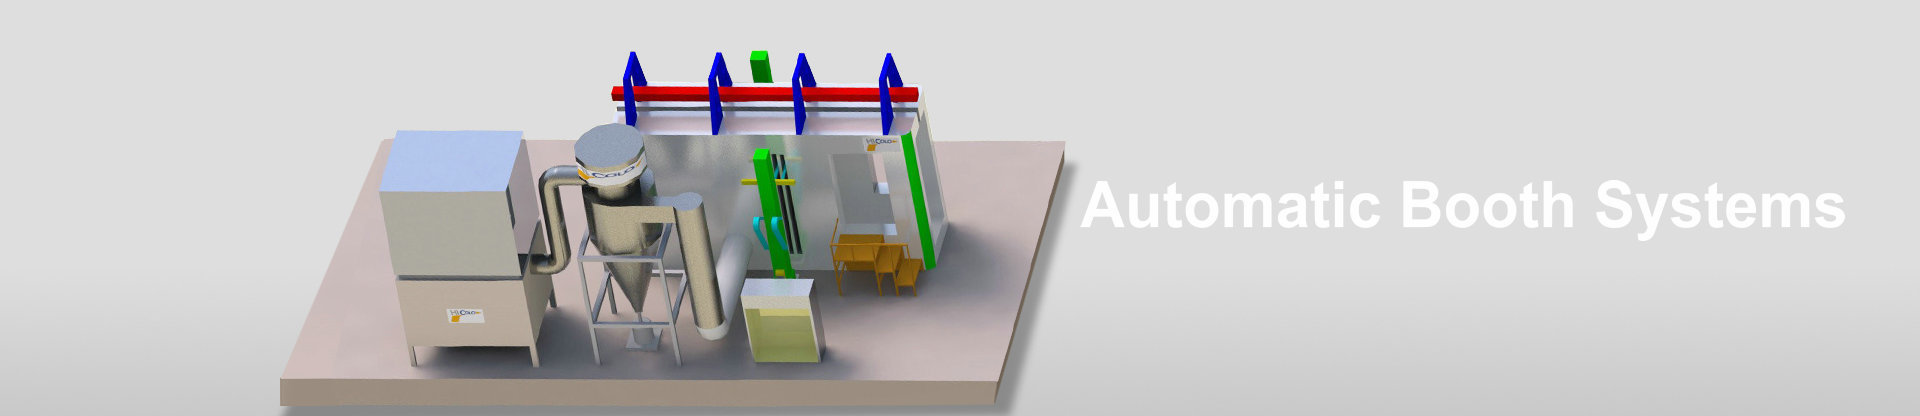 Automatic Booths Systems